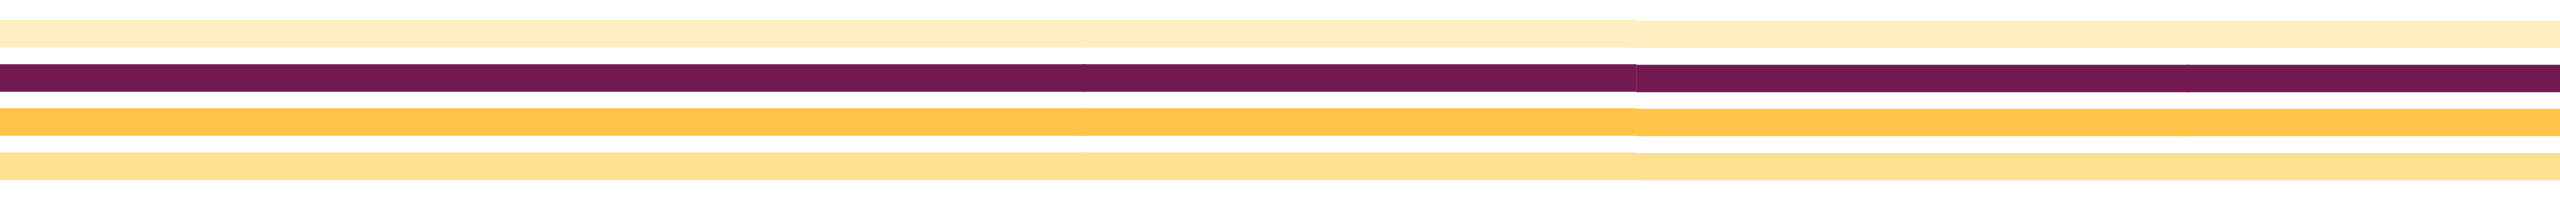 the crafty mac branding colors as a multi-line divicer